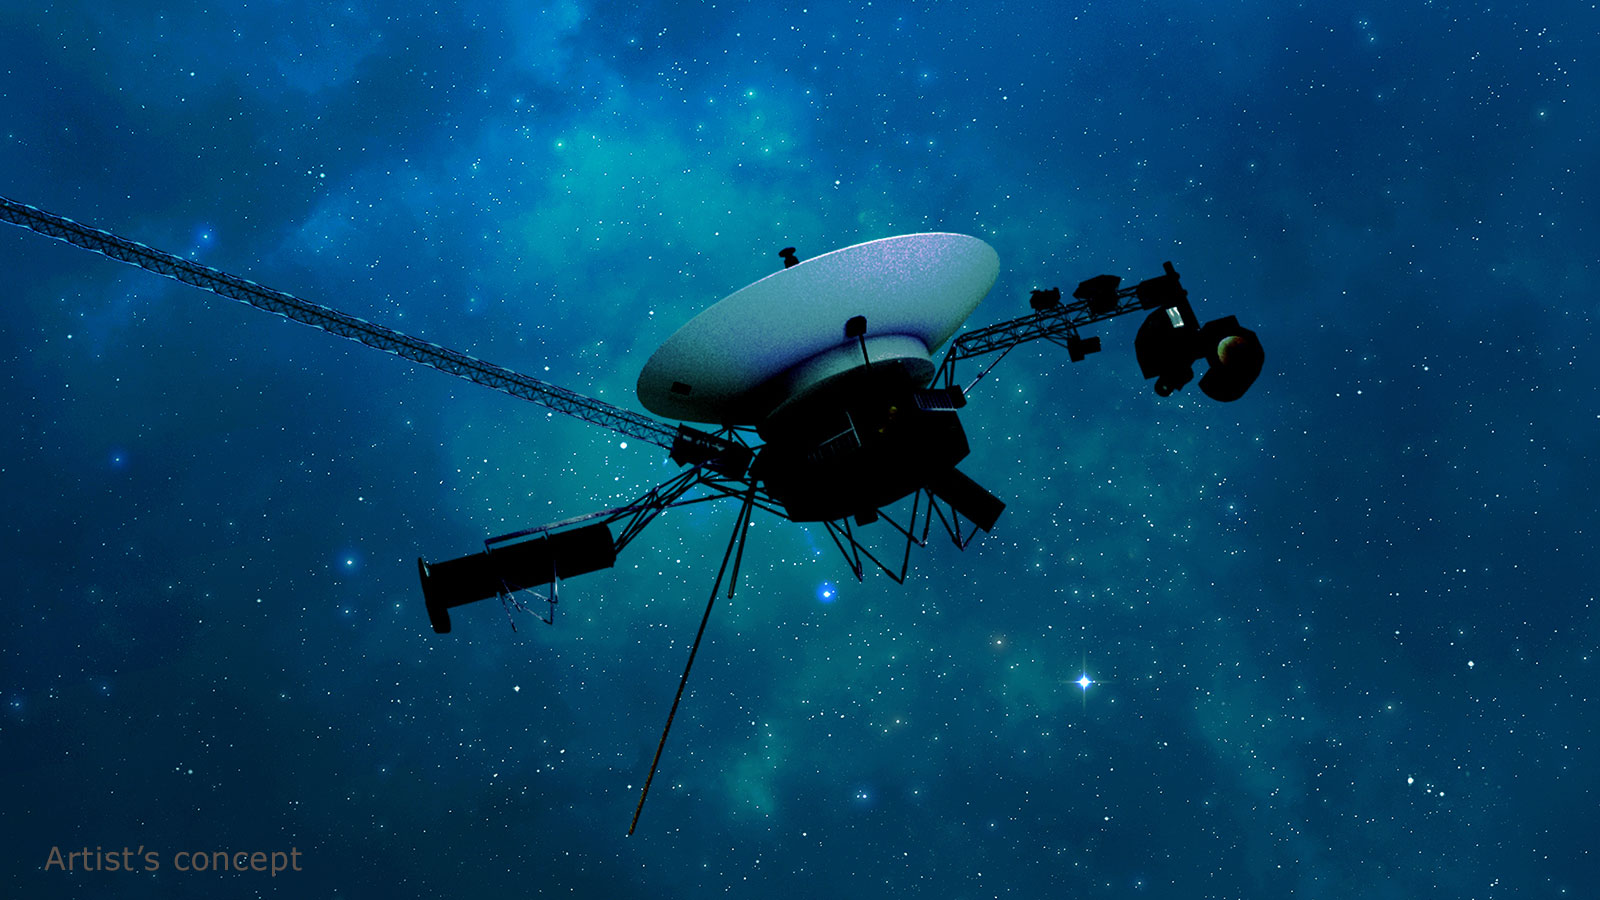 the voyager 1